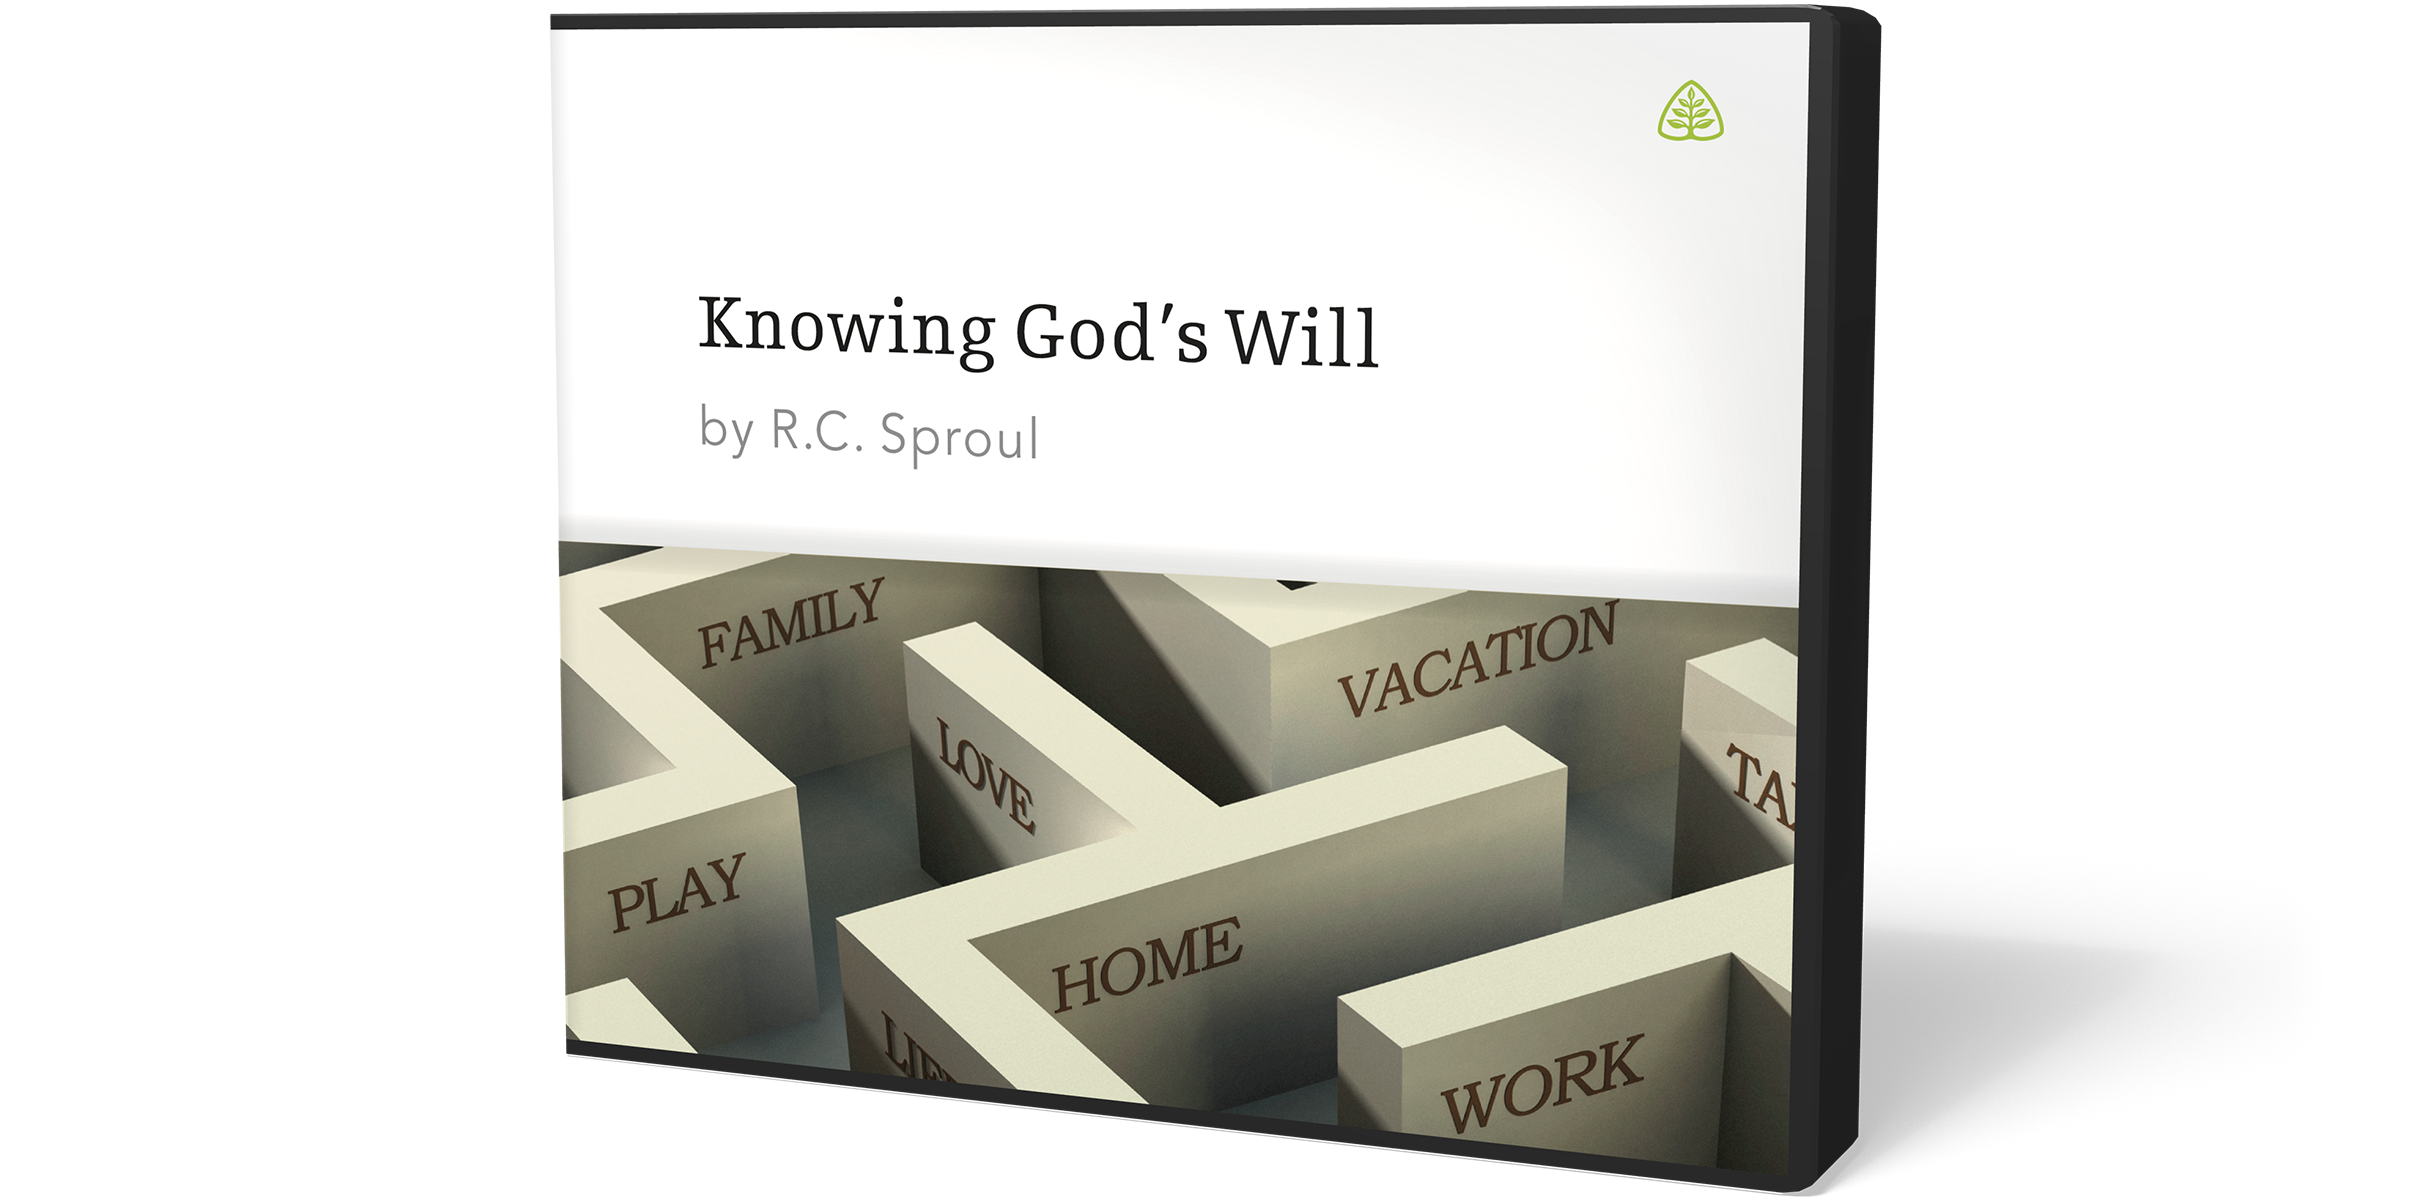 Knowing God's Will